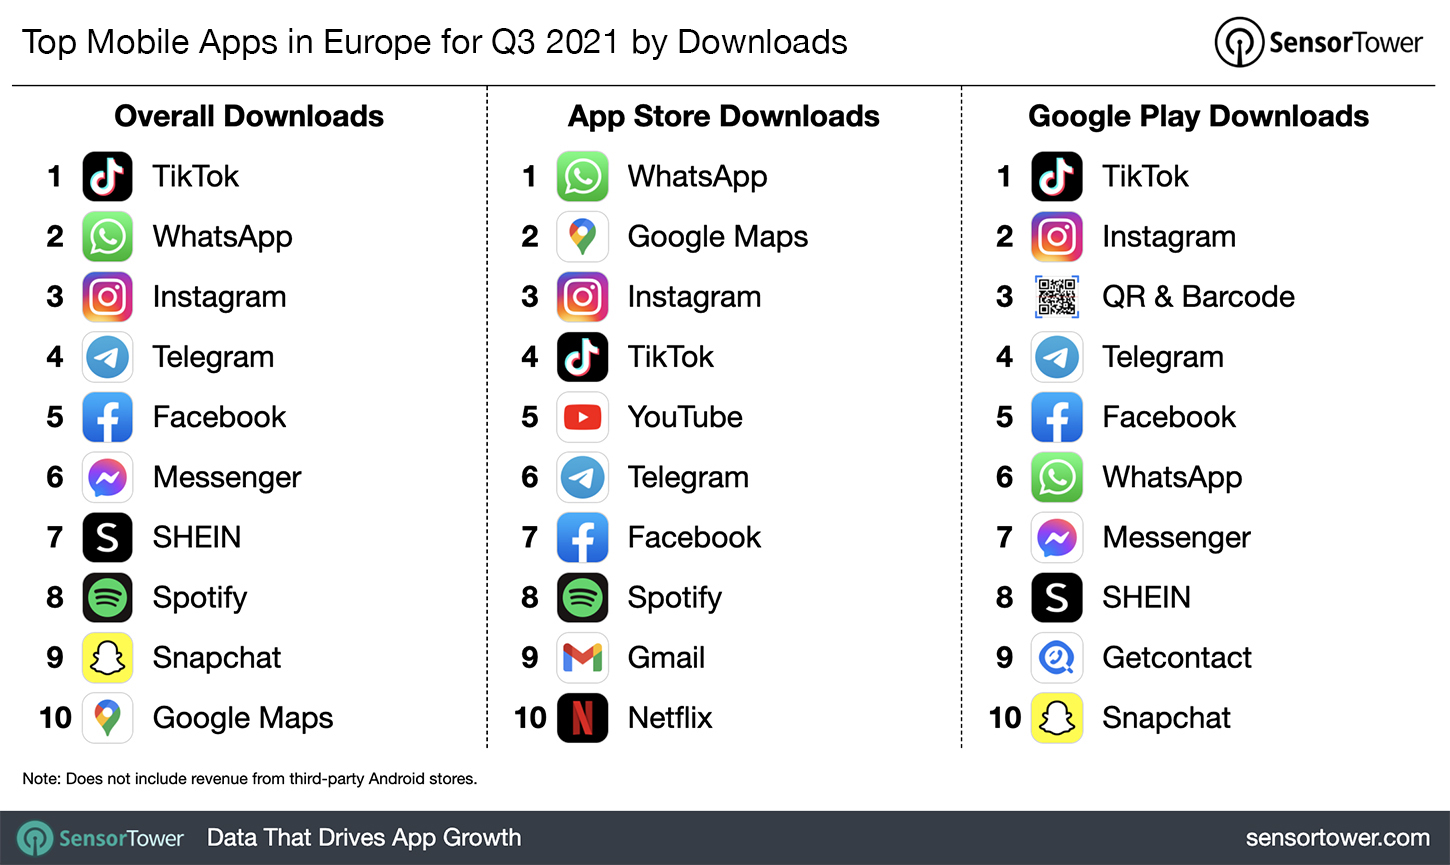 Top Mobile Apps in Europe for Q3 2021 by Downloads – App Store and Google Play